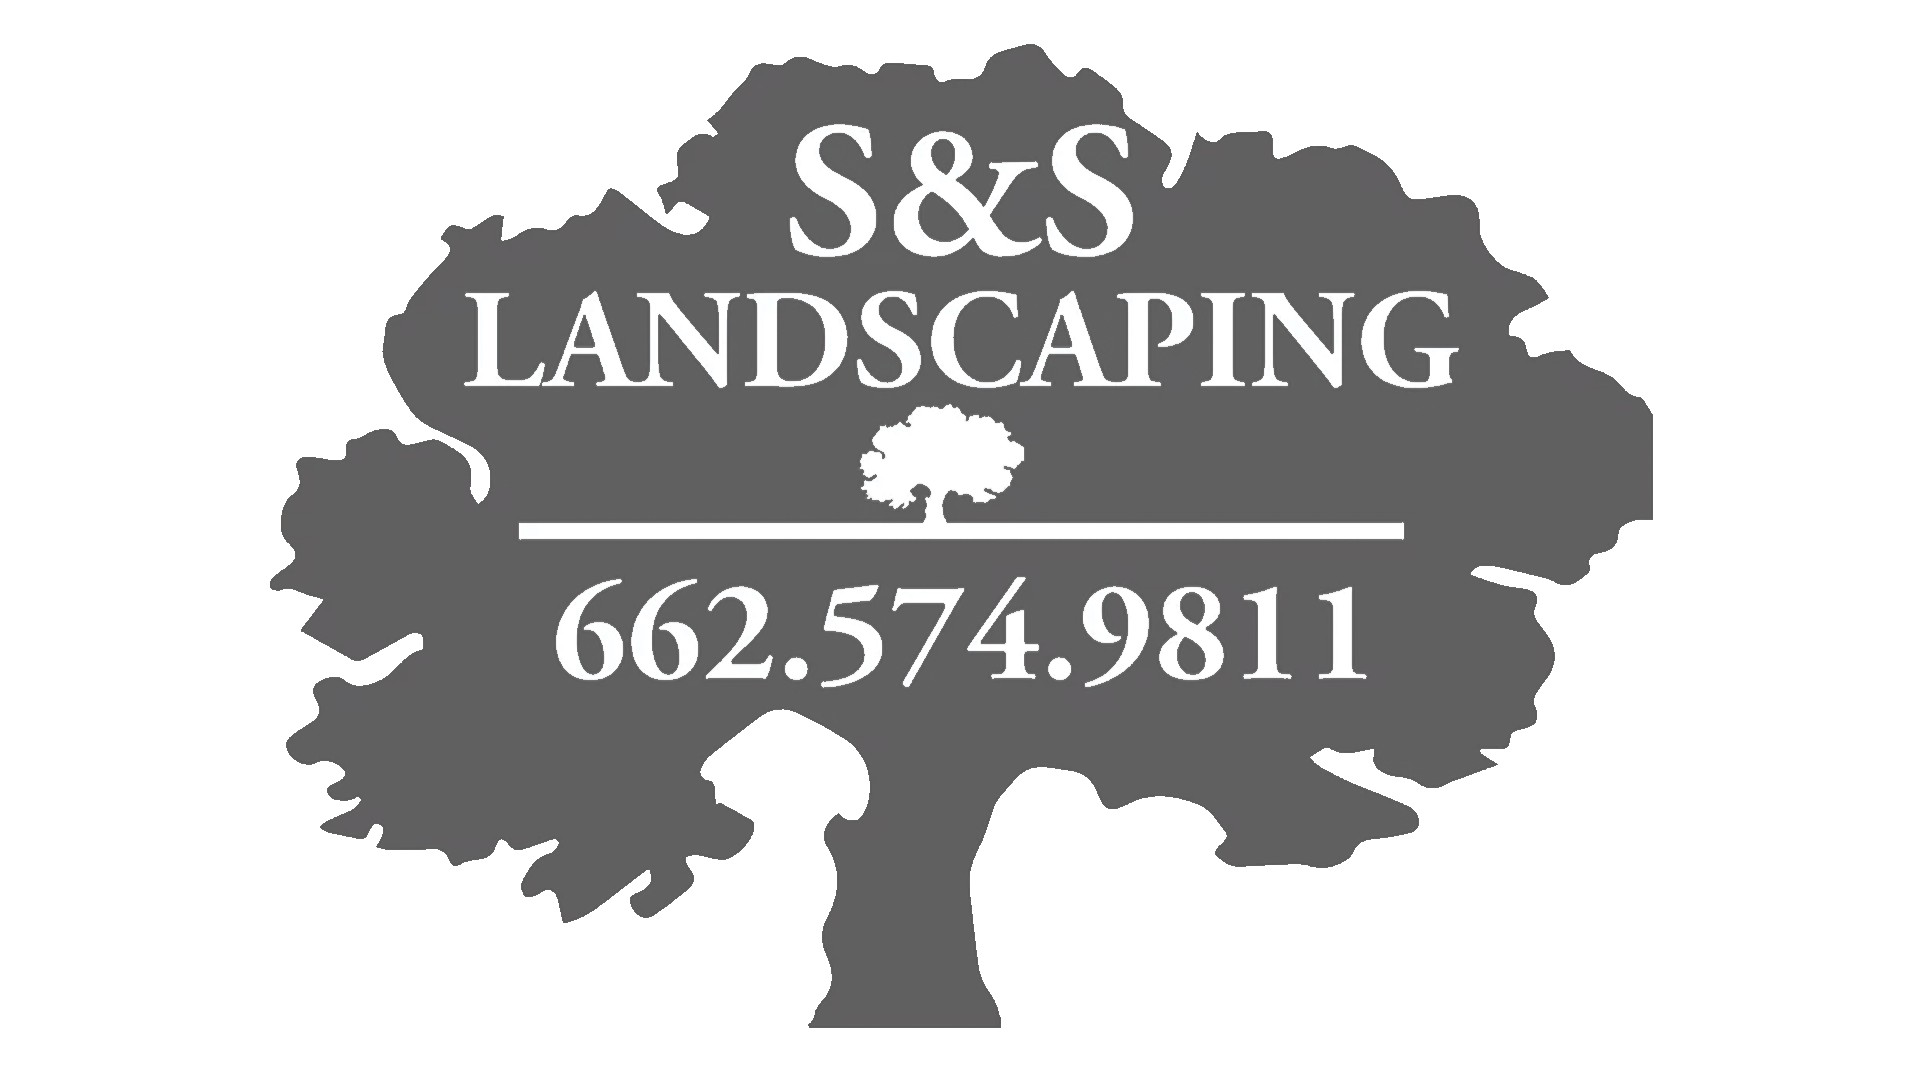 Ss Landscaping Image